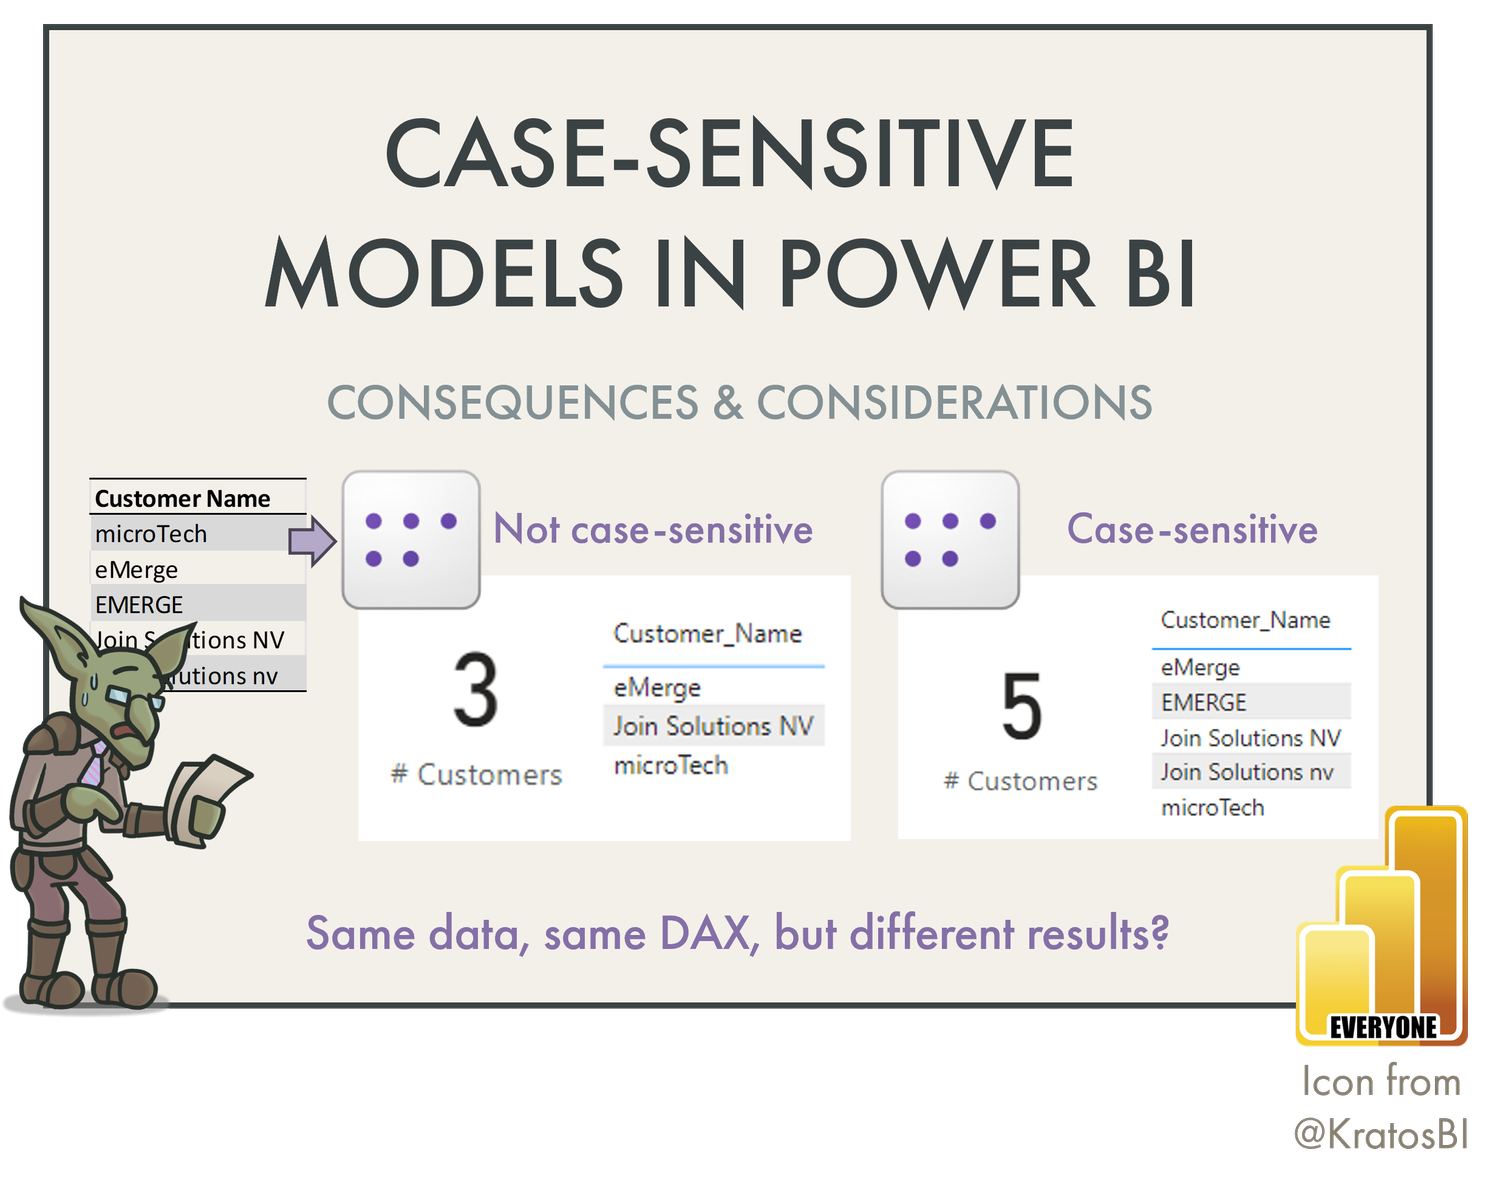 Case-sensitive models in Power BI: consequences & considerations